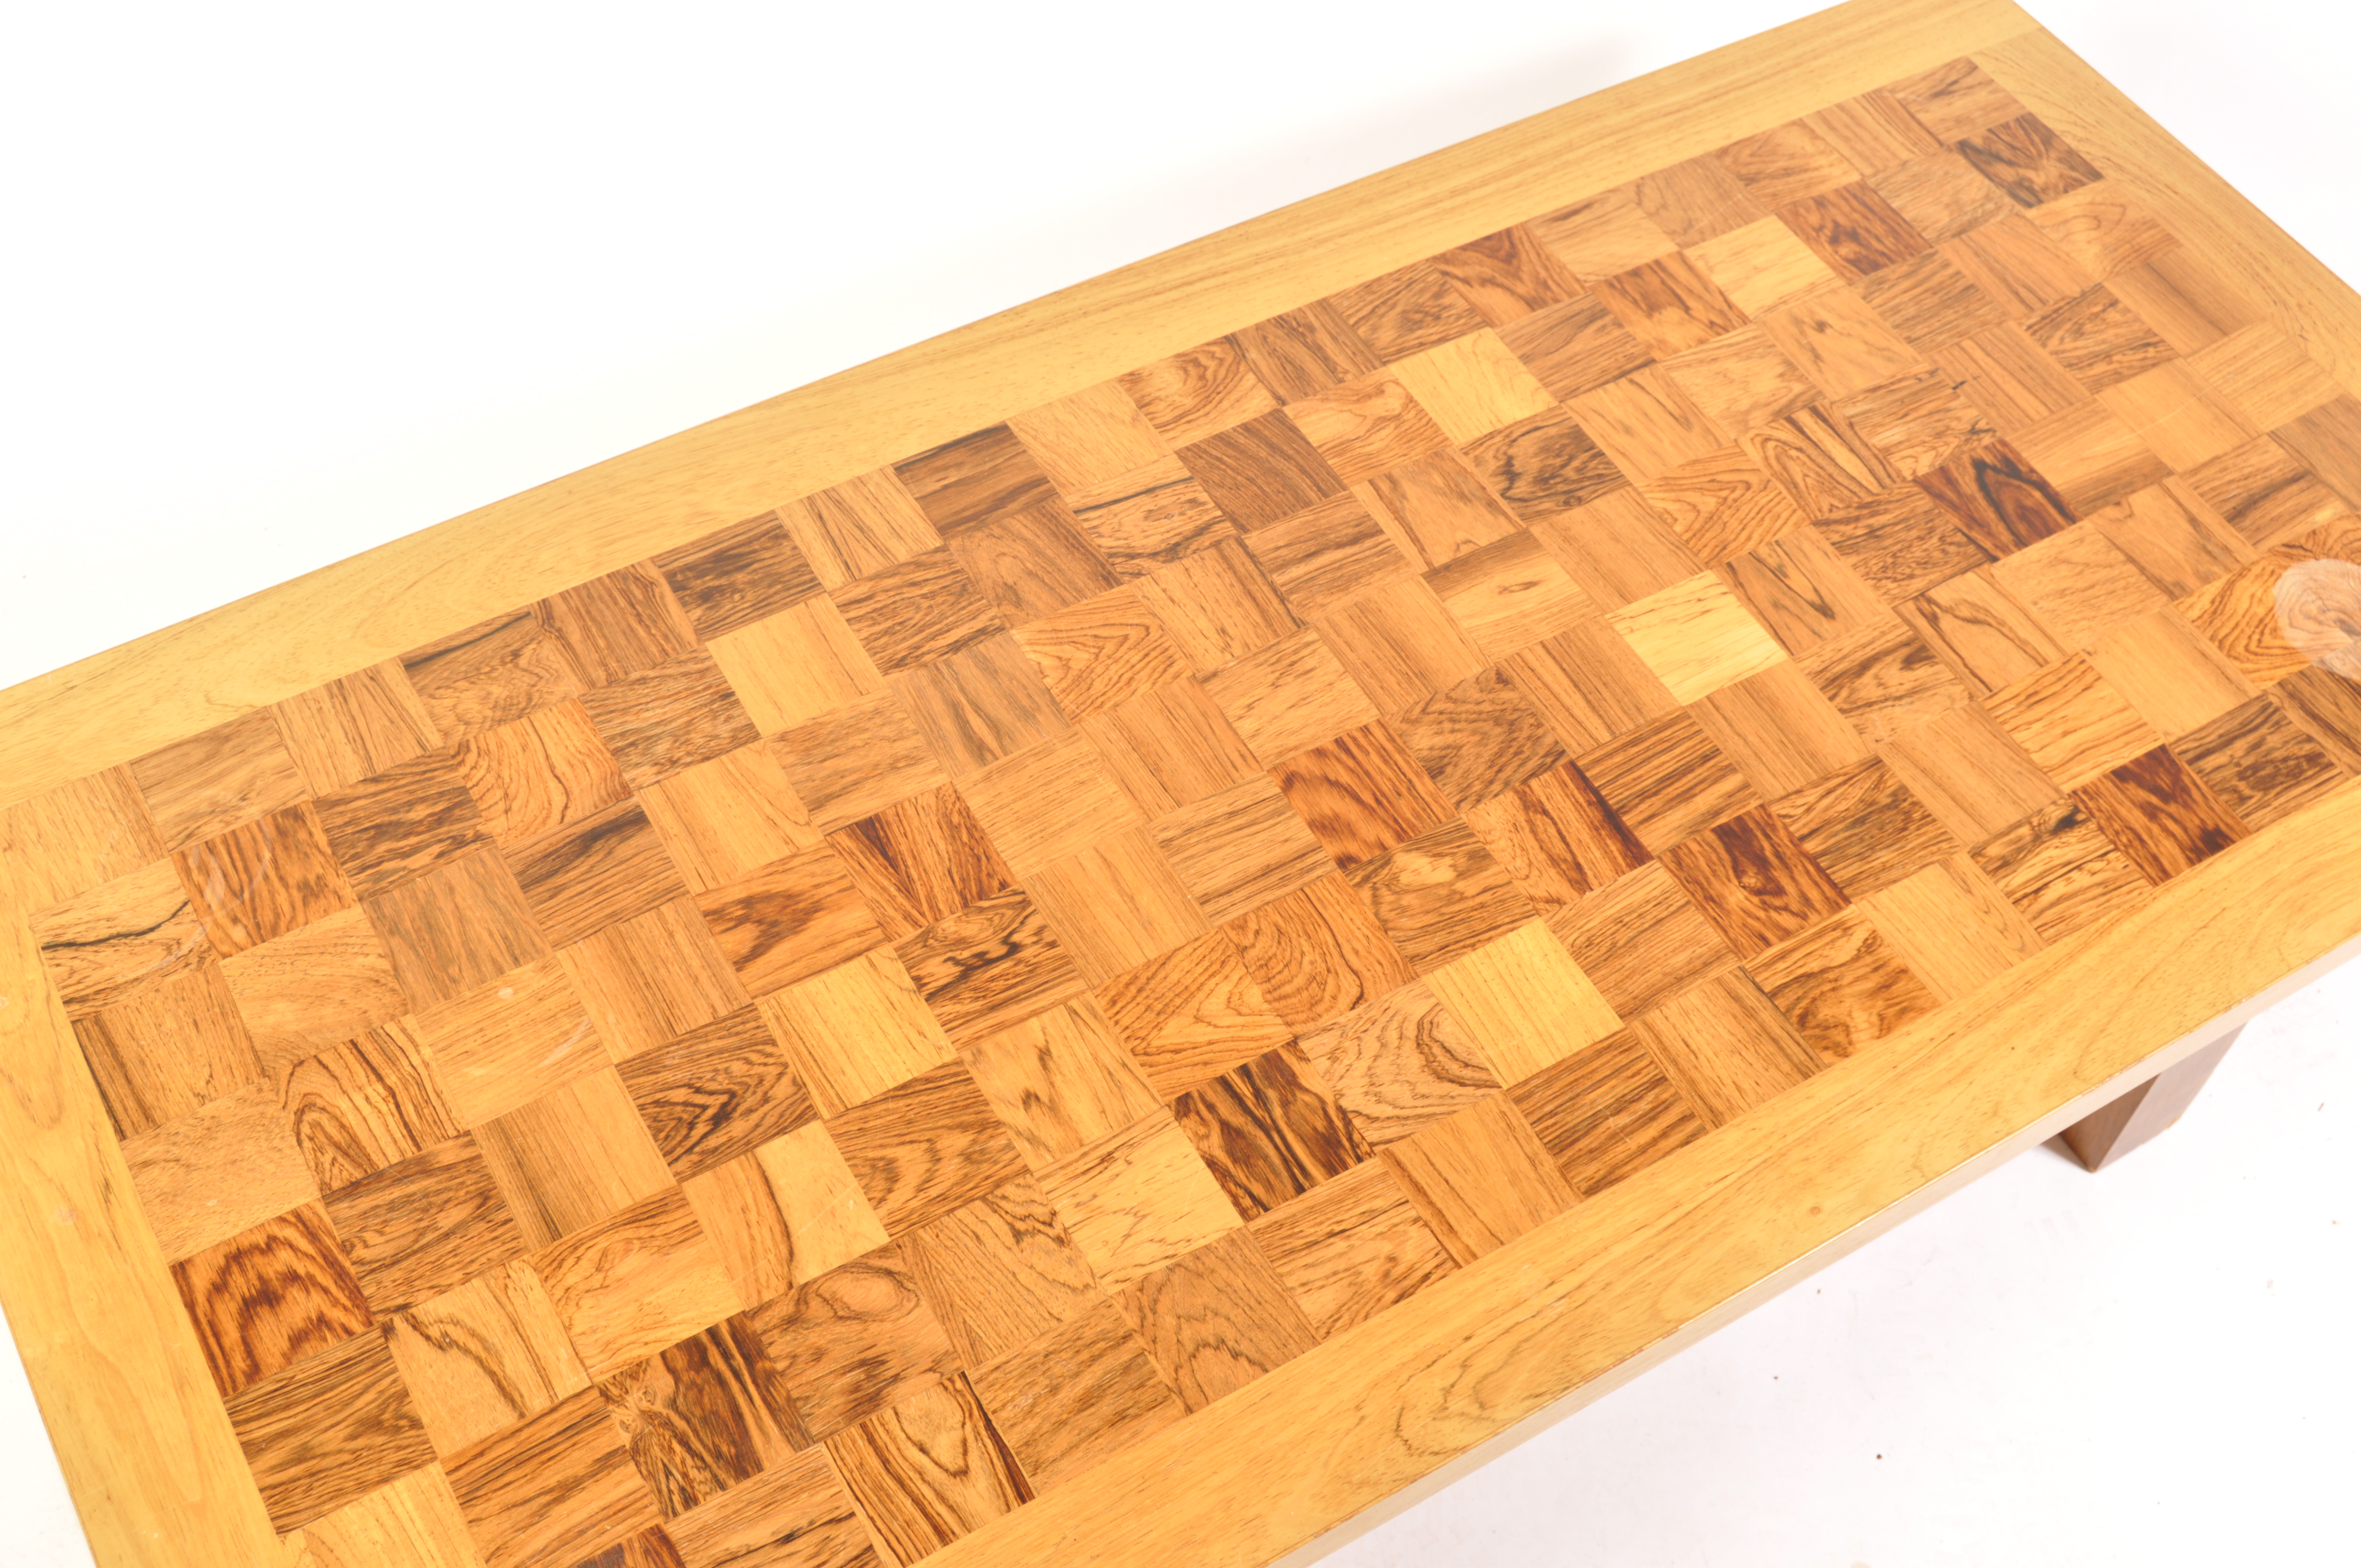 CADO VINTAGE DANISH PARQUETRY TOPPED COFFEE TABL:E - Image 3 of 5